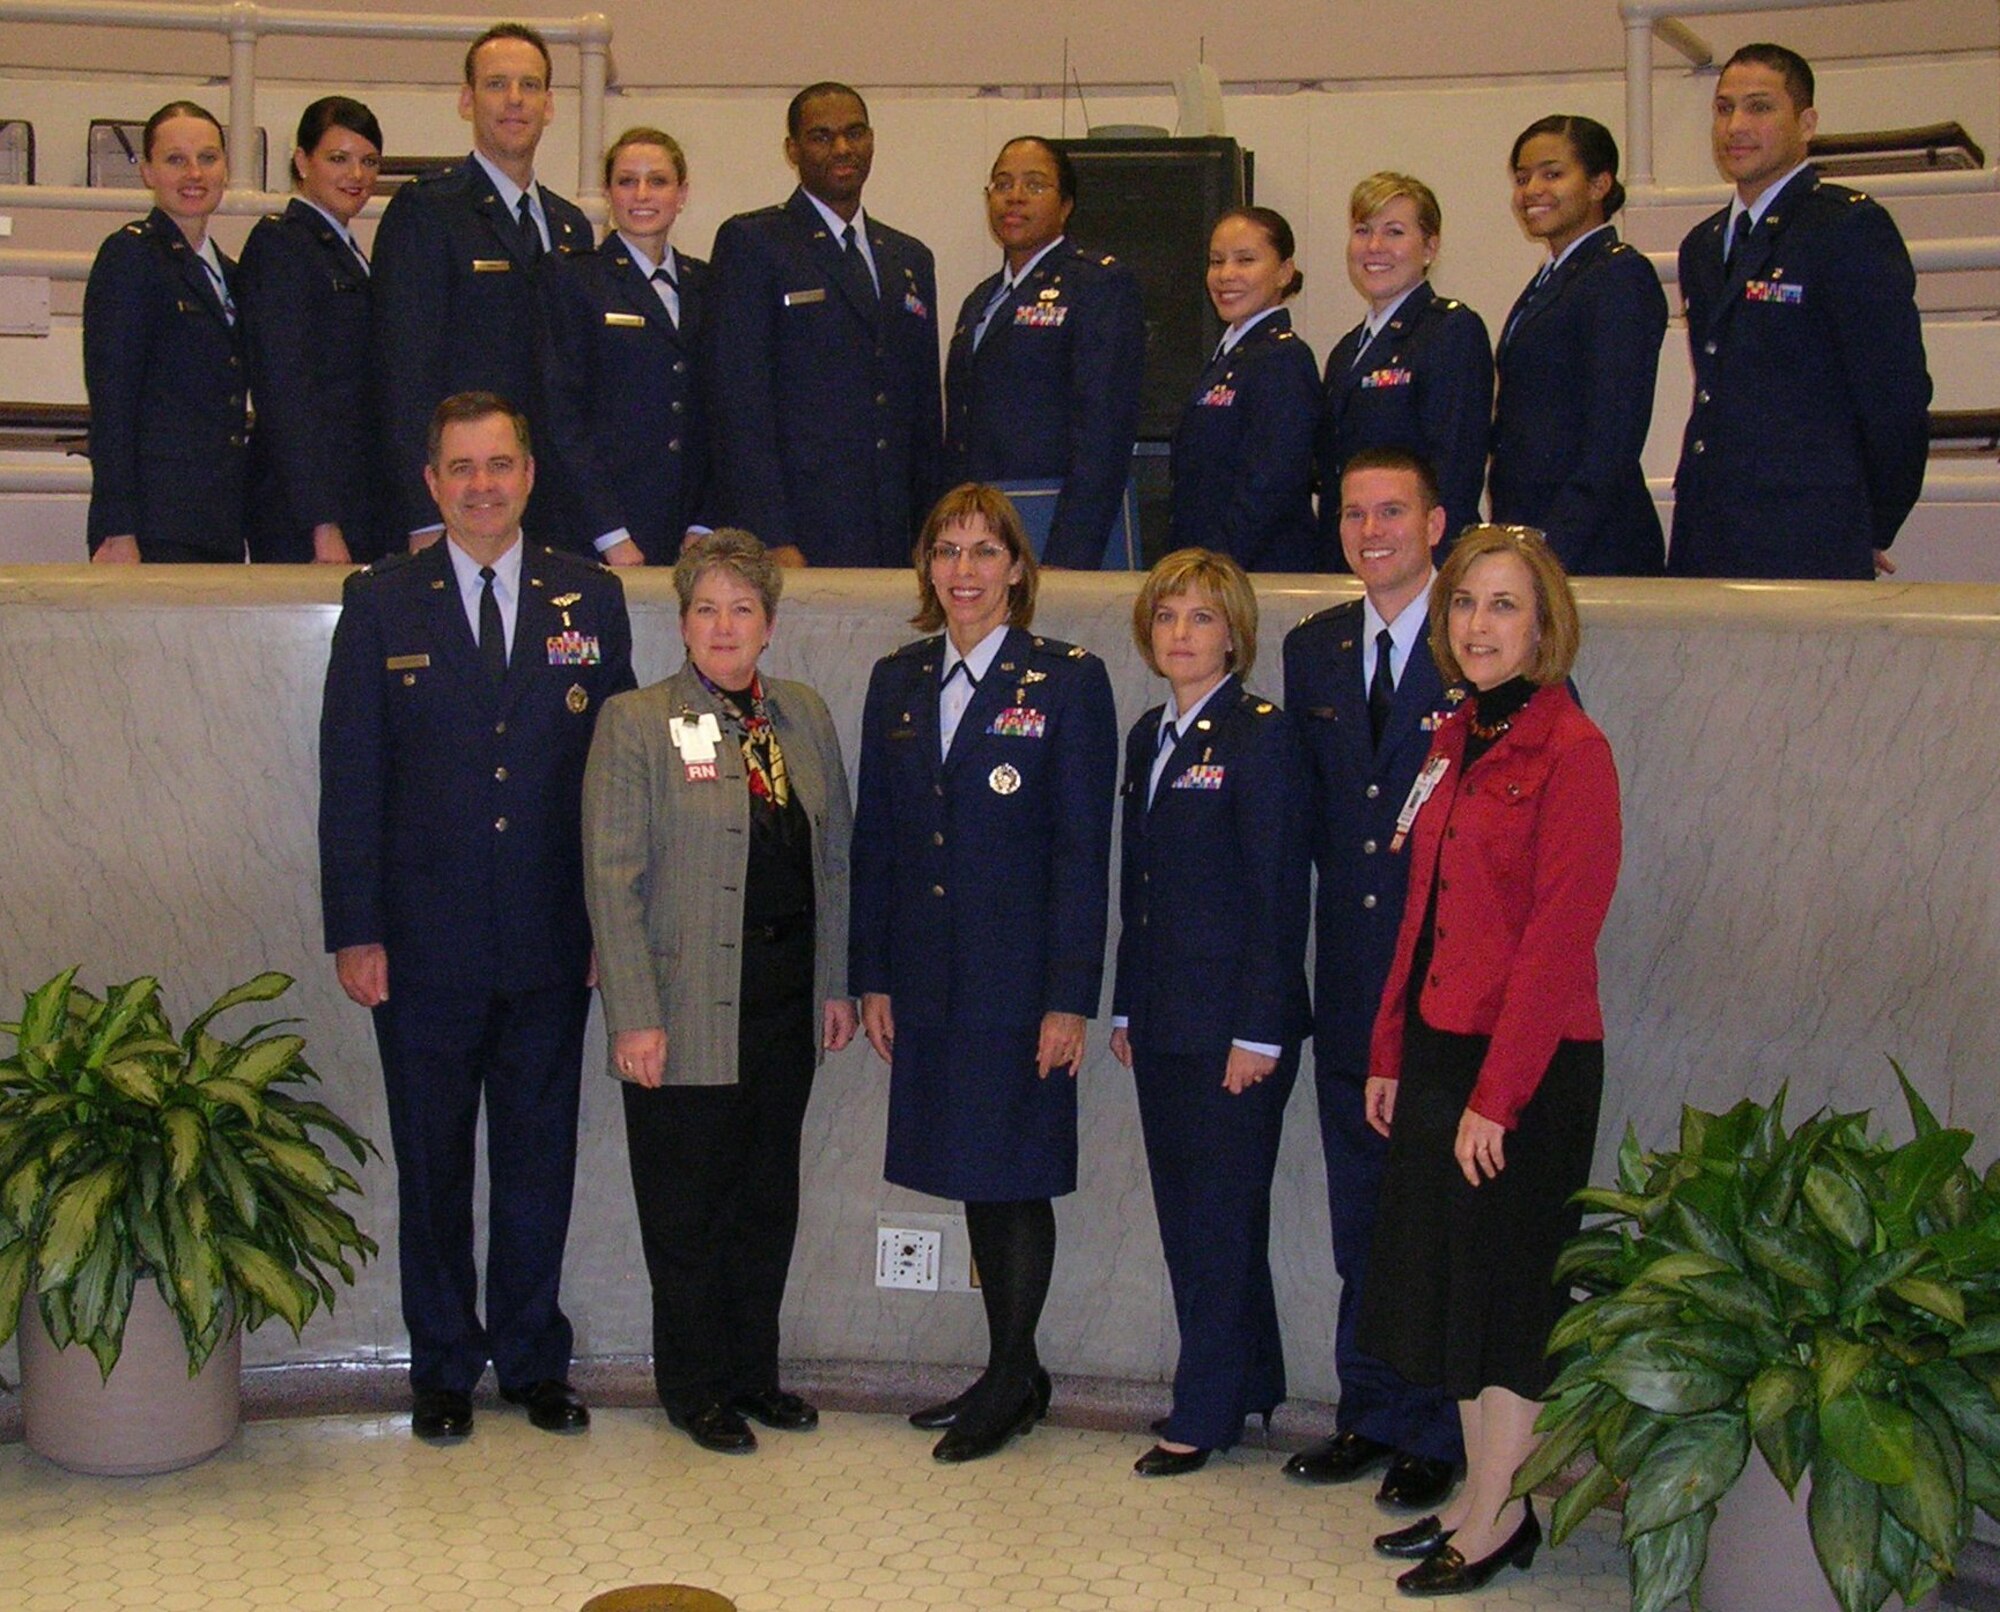 Members of the first graduating class for the Nurse Transition Program at University Hospital Cincinnati on Dec. 11.  Top row (L-R) are second lieutenants Jessica Roberts, Candice Walter, Christopher Price, Sarabeth Hershey, Joseph Harvey, Sharon Eleby, Lisis Davila, Dona Brady, Maureceia Autry, and Isaac Andino.  Bottom row are Air Force and hospital officials: Col. Thomas Langston, chief nurse, 88th Medical Group at Wright-Patterson Medical Center; Cindy Campbell, director of nursing operations, Univ. Hospital; Col. Kimberly Slawinski, commander, 88th Medical Group; Maj. Christine Berberick, chief of the Nurse Transition Program; Capt. Joshua Lundquist, course supervisor; and Amy Costanzo, manager of clinical education, University Hospital.  (U.S. Air Force photo/Mike Frangipane) 